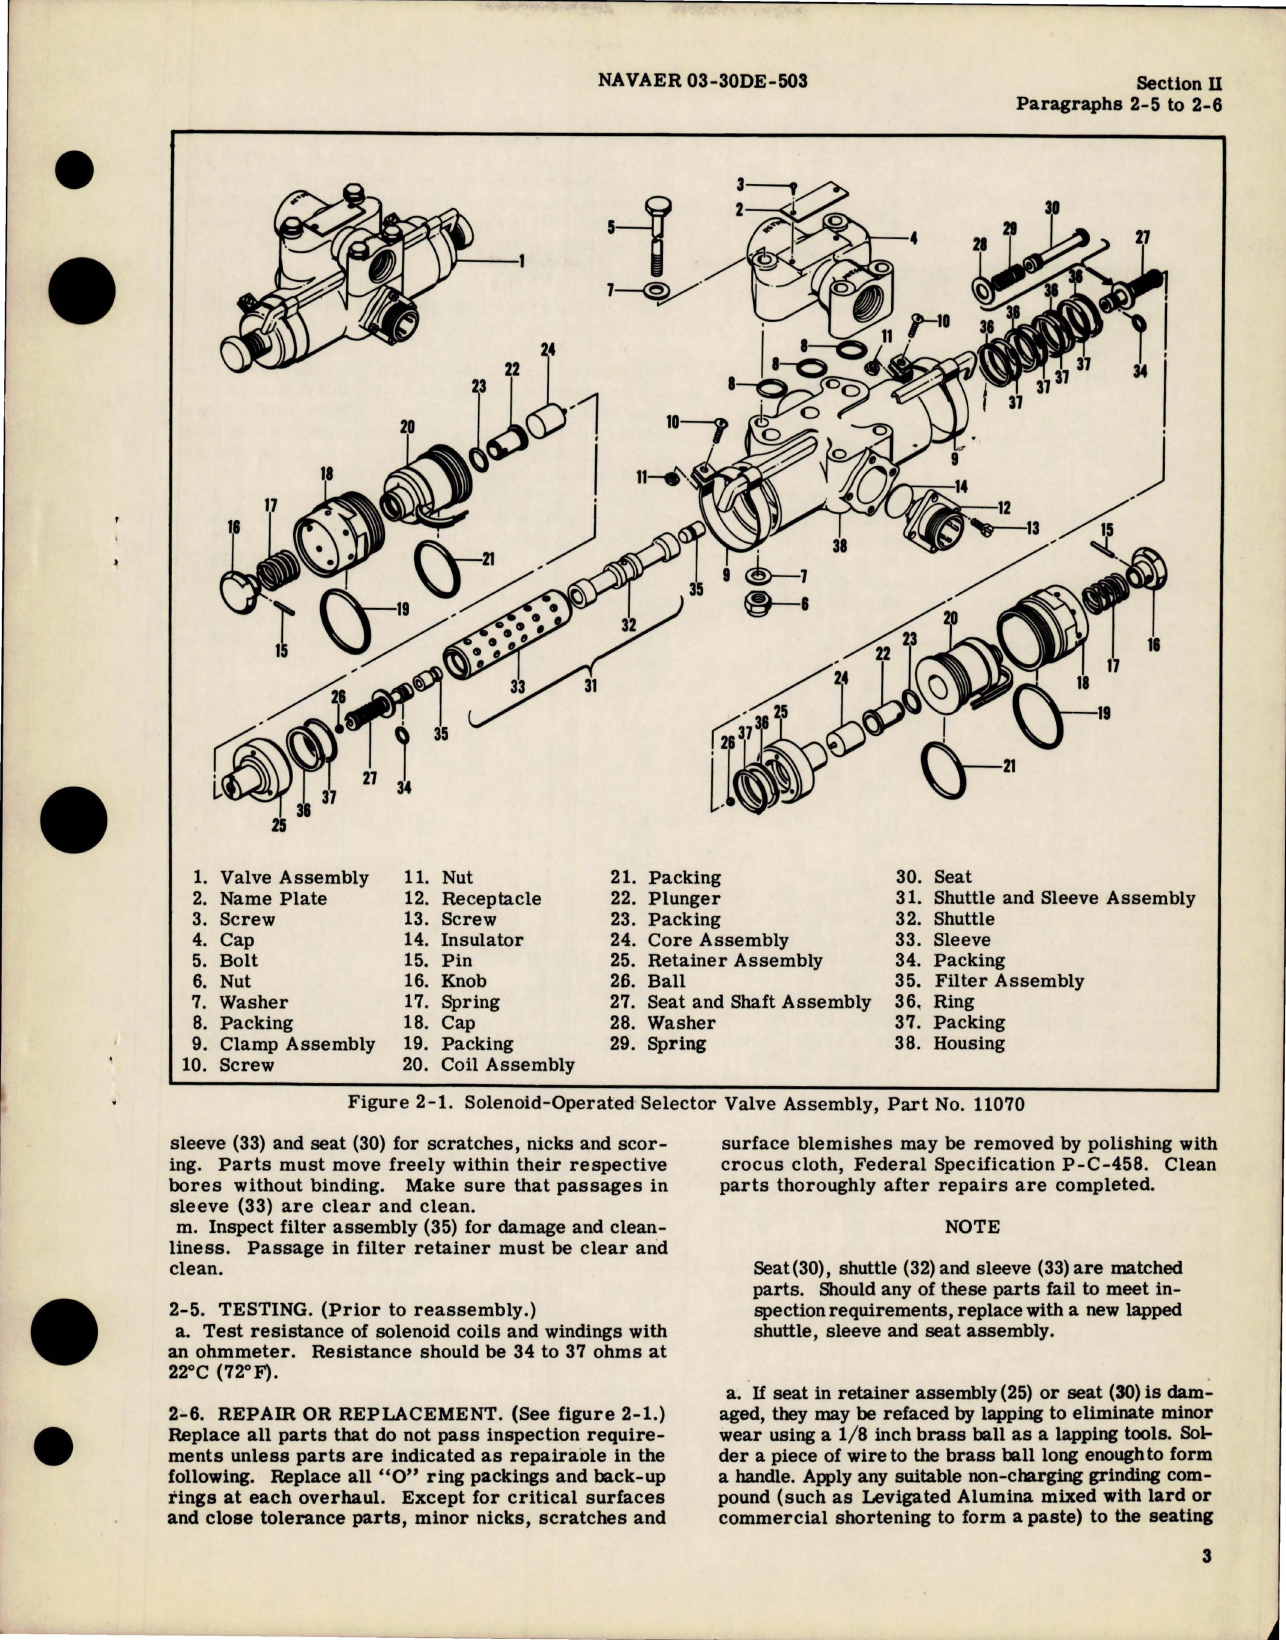 Sample page 5 from AirCorps Library document: Overhaul Instructions for Solenoid Operated Selector Valve - Part 11070